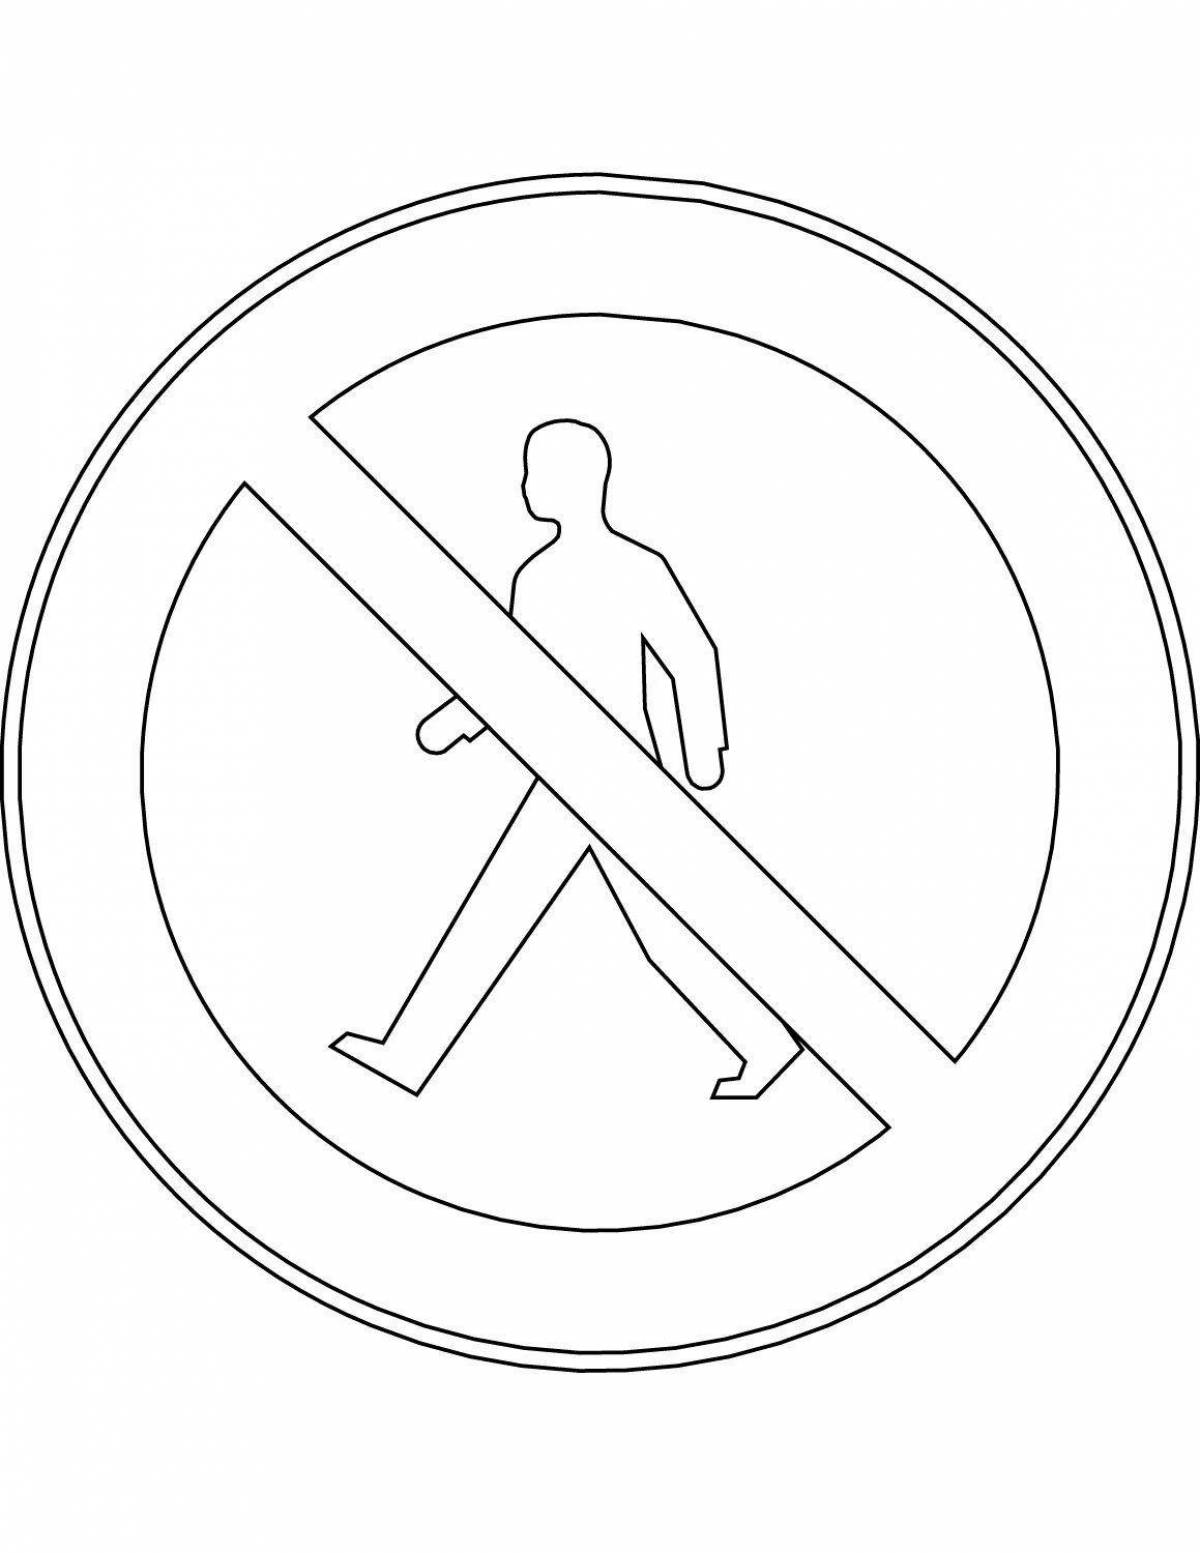 Mysterious no traffic signs coloring page